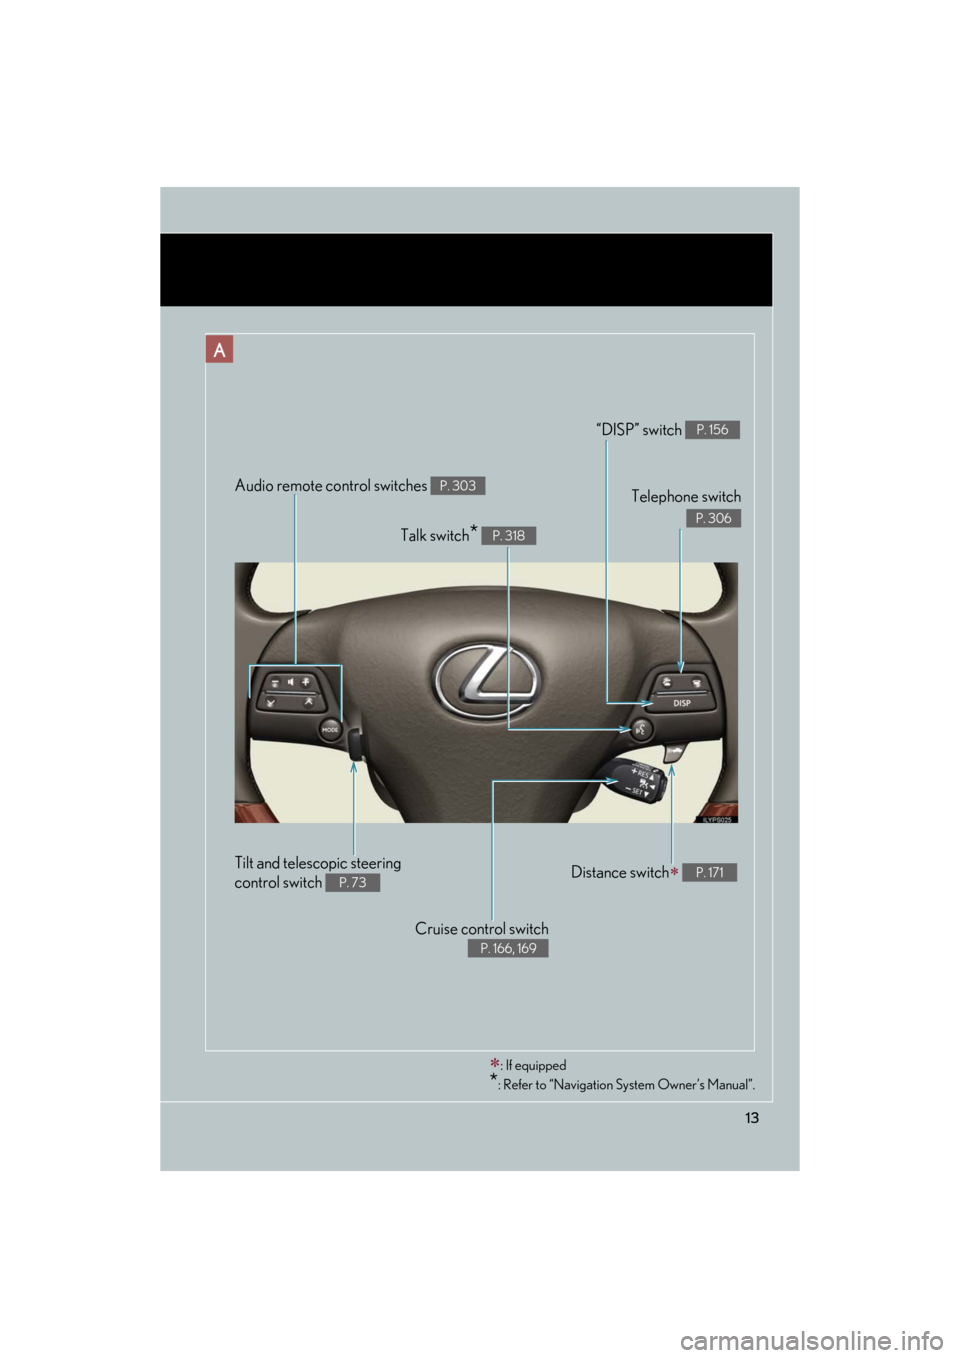 Lexus GS450h 2008  Using other driving systems / LEXUS 2008 GS450H  (OM30A96U) User Guide 13
GS_HV_U
December 12, 2007 3:50 pm
Audio remote control switches P. 303
Cruise control switch 
 
P. 166, 169
Telephone switch 
P. 306
“DISP” switch P. 156
Distance switch P. 171
Talk switch* 